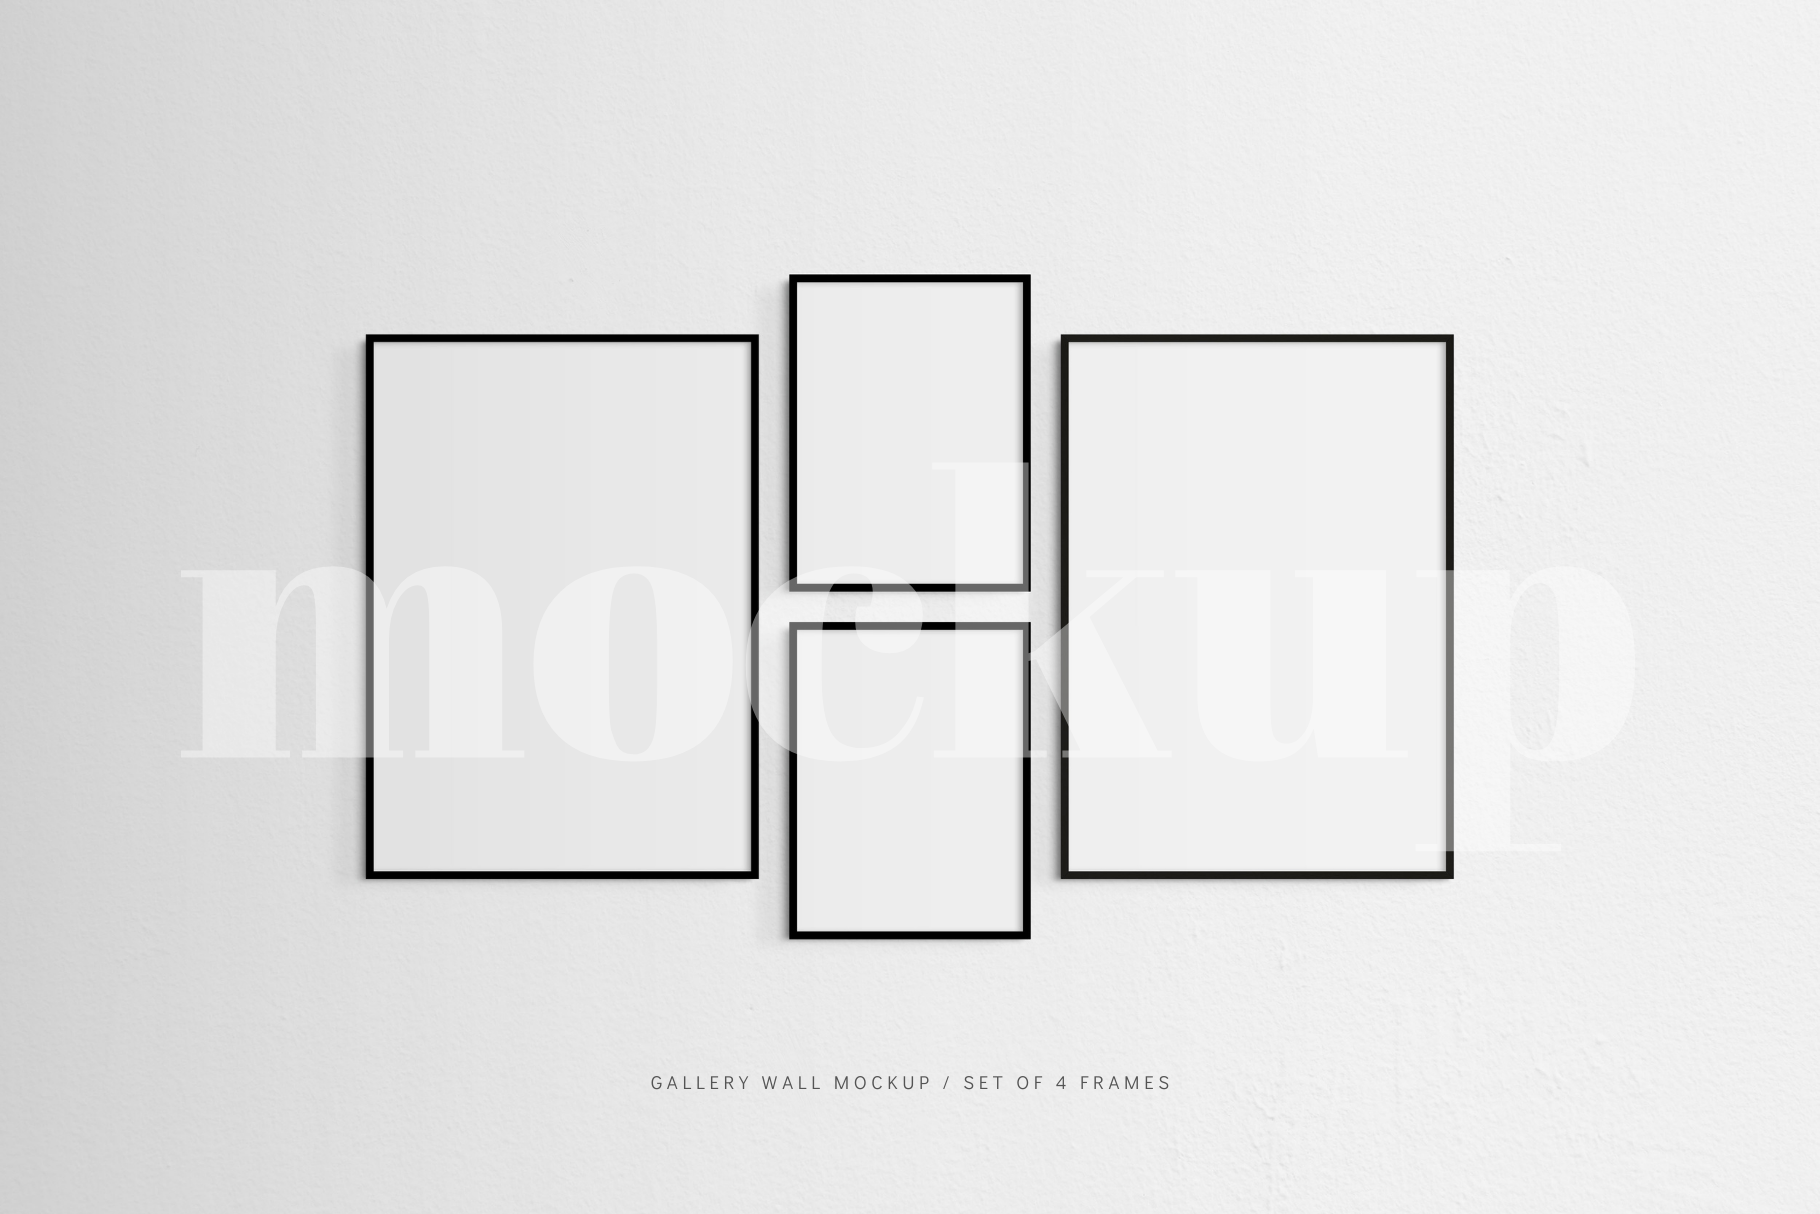 A modern, minimalist gallery wall mockup that features a set of 4 thin black frames.